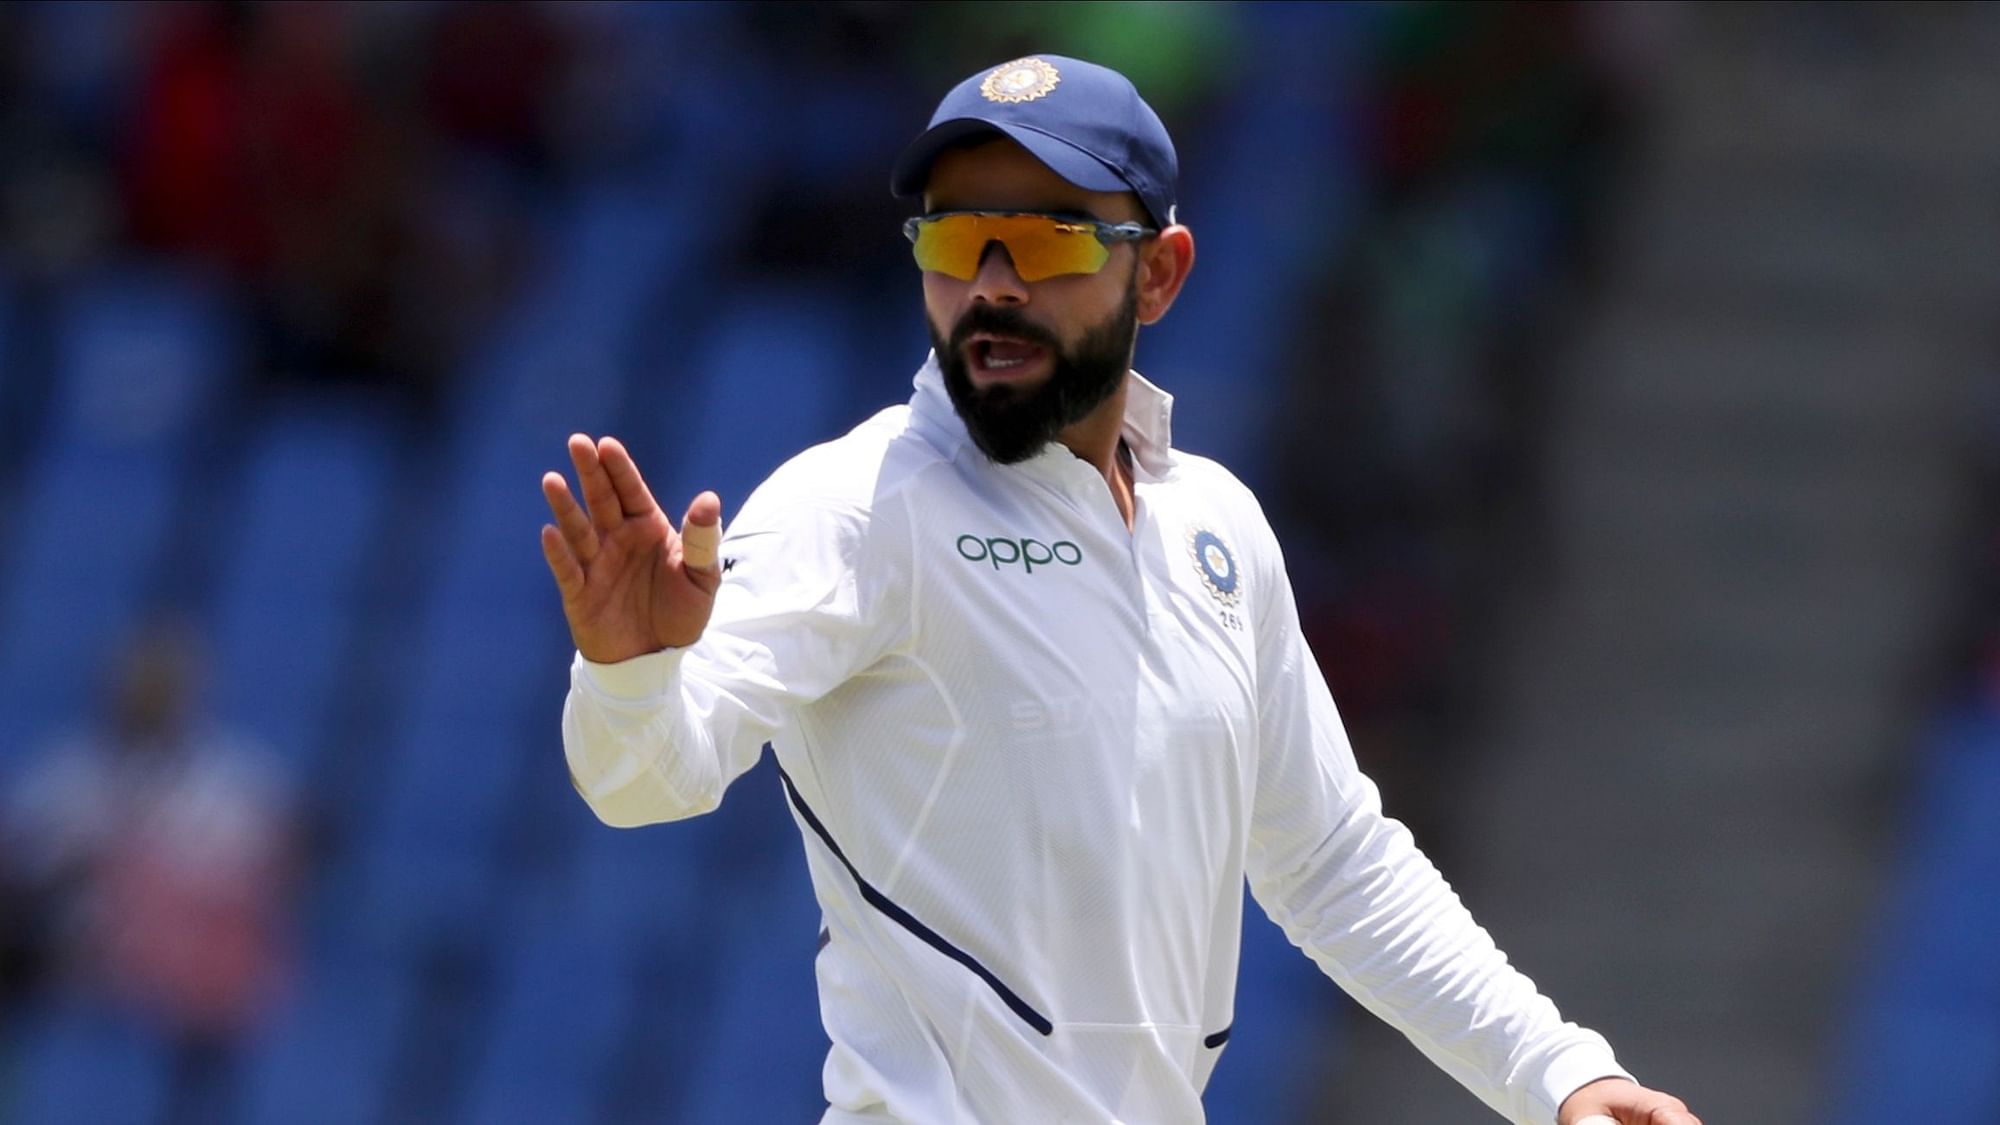 The Indian players will wear black armbands when they take the field on the third day of the first Test against West Indies.